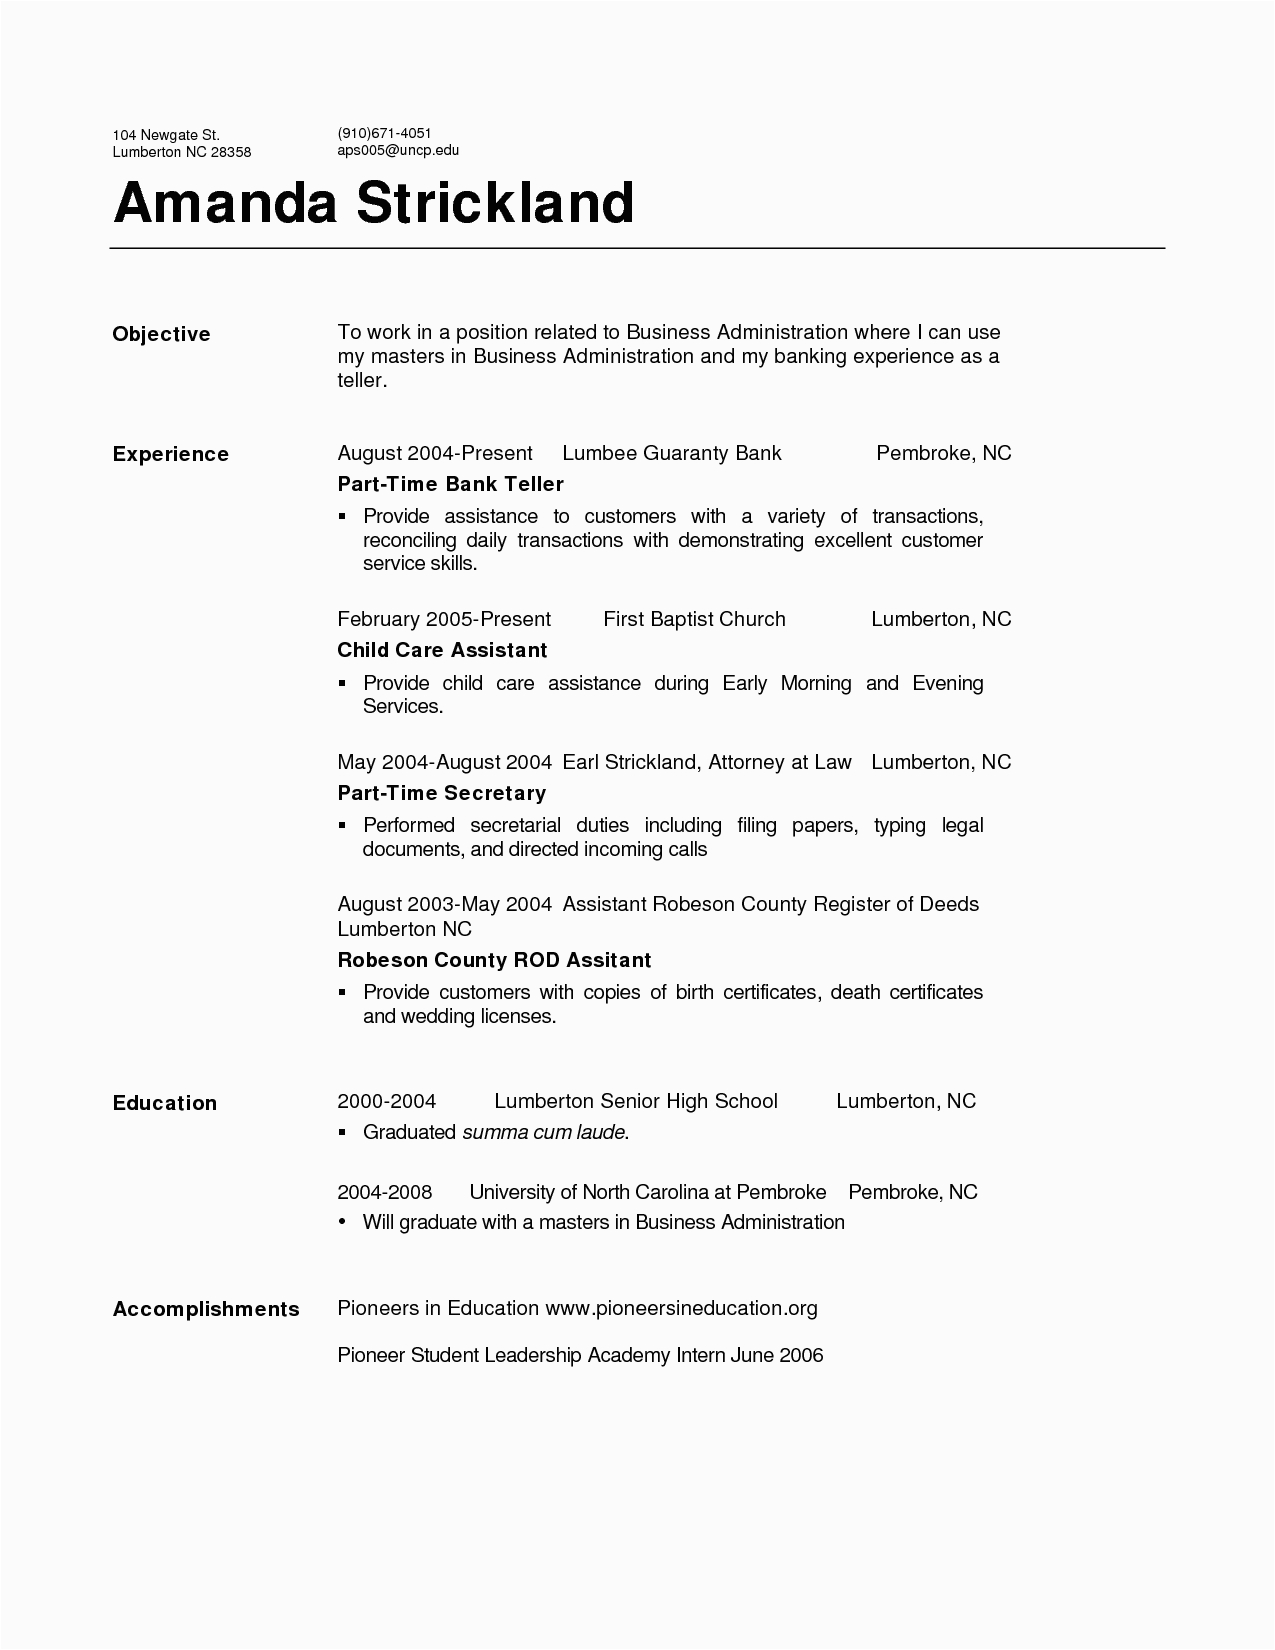 Sample Resume for Bank Jobs with No Experience Pdf Sample Bank Teller Resume No Experience